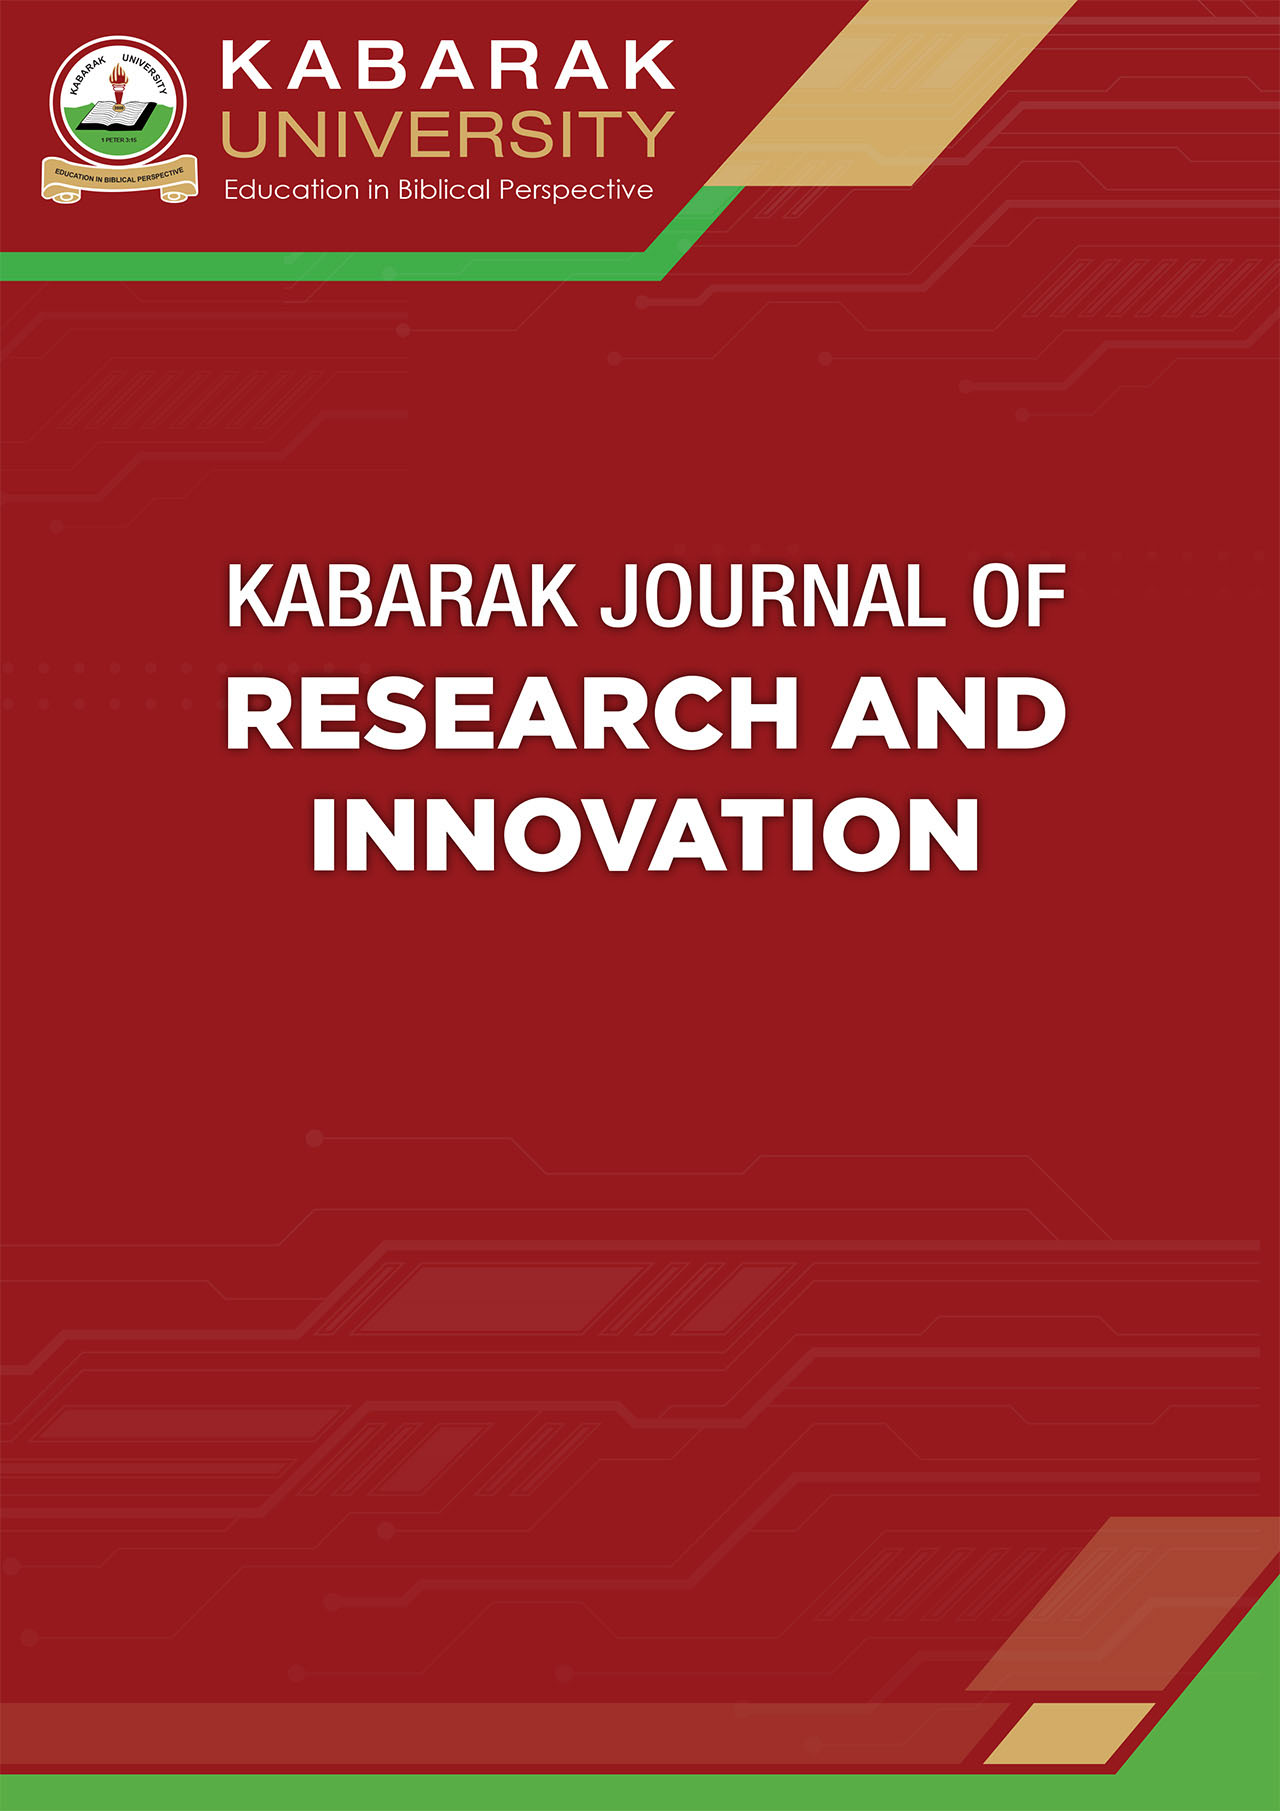 					View Vol. 10 No. 1 (2020): Kabarak Journal of Research and Innovation (KJRI)
				